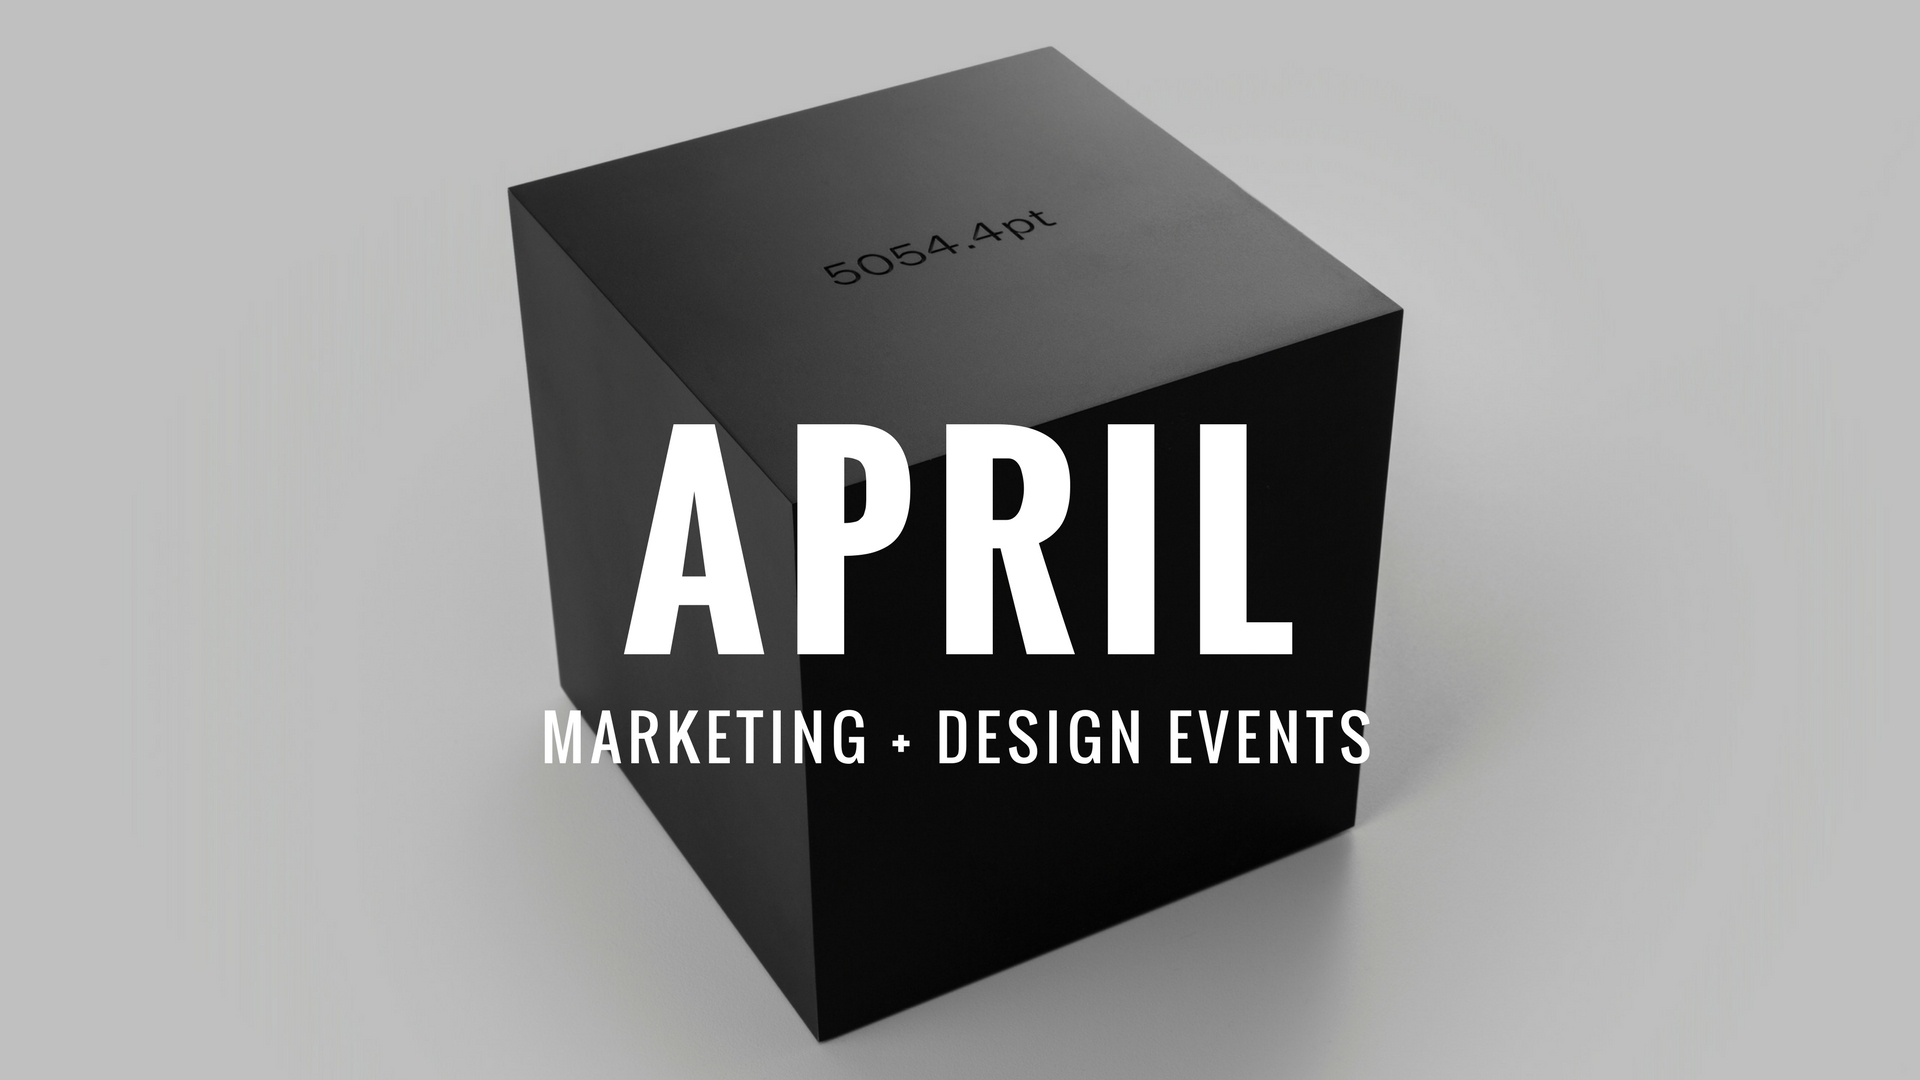 April 2018 Marketing and Design Events in St. Louis